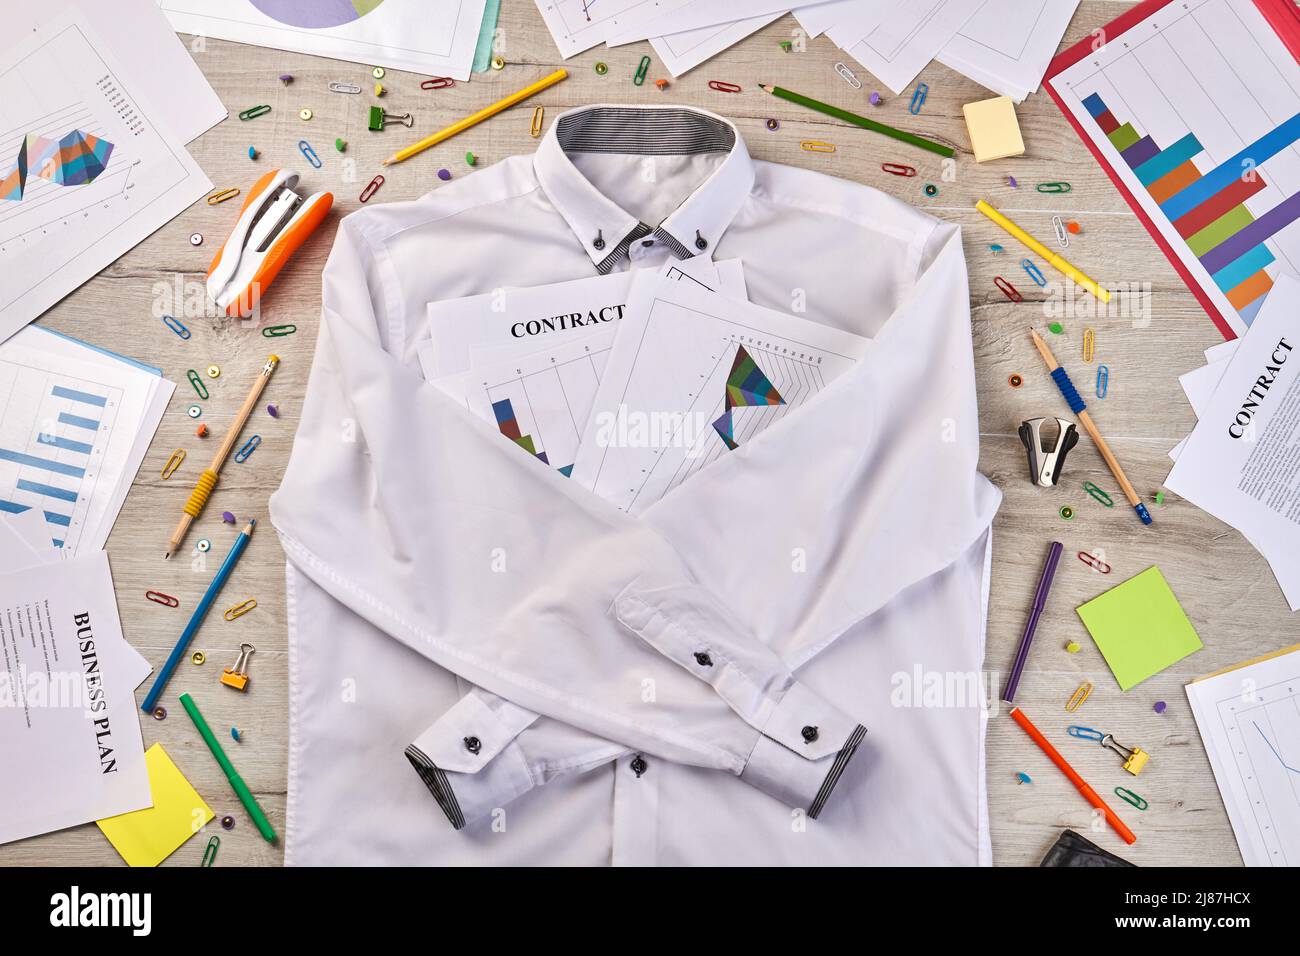 Top view white shirt with stationery workdesk stuff. Paperclips staplers pens etc. Stock Photo